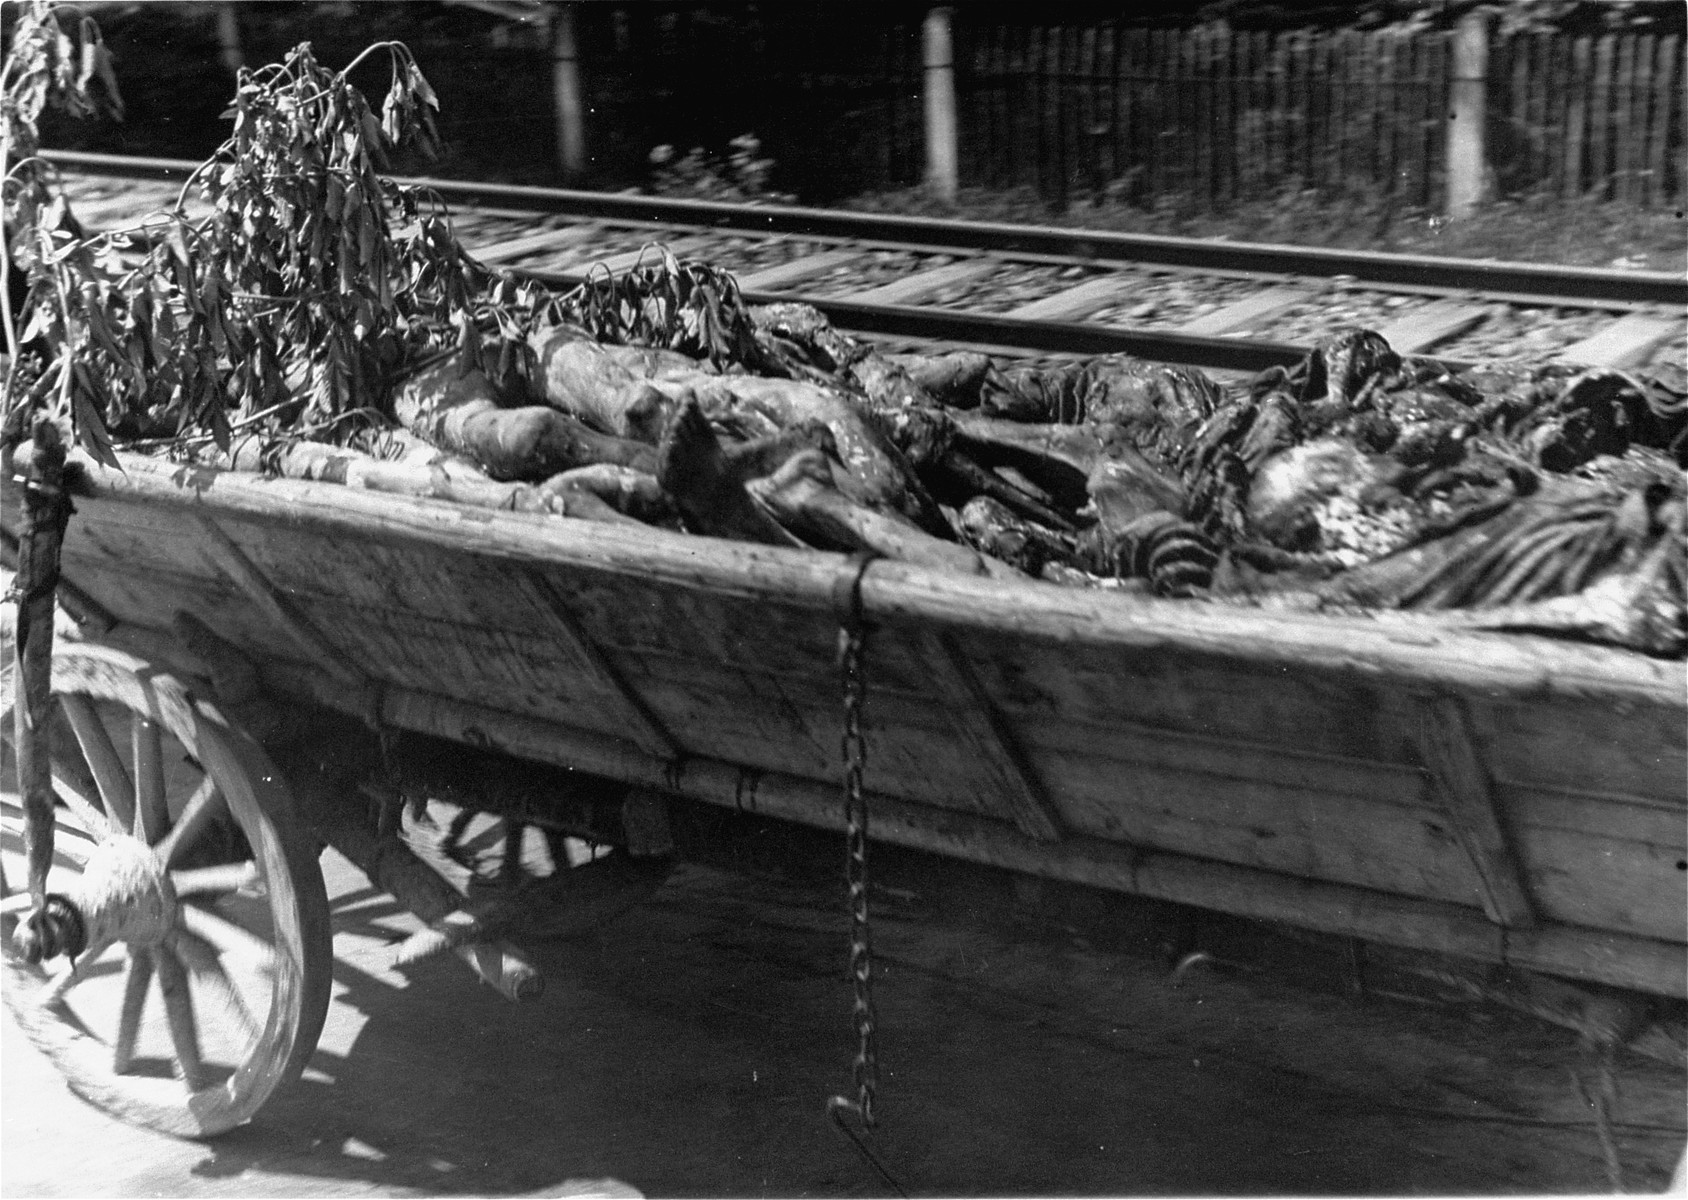 Corpses from the Dachau concentration camp on route to burial in a cart levied from local farmers.  Allied authorities required local farmers to drive their loaded carts through the town of Dachau as an education for Dachau residents.